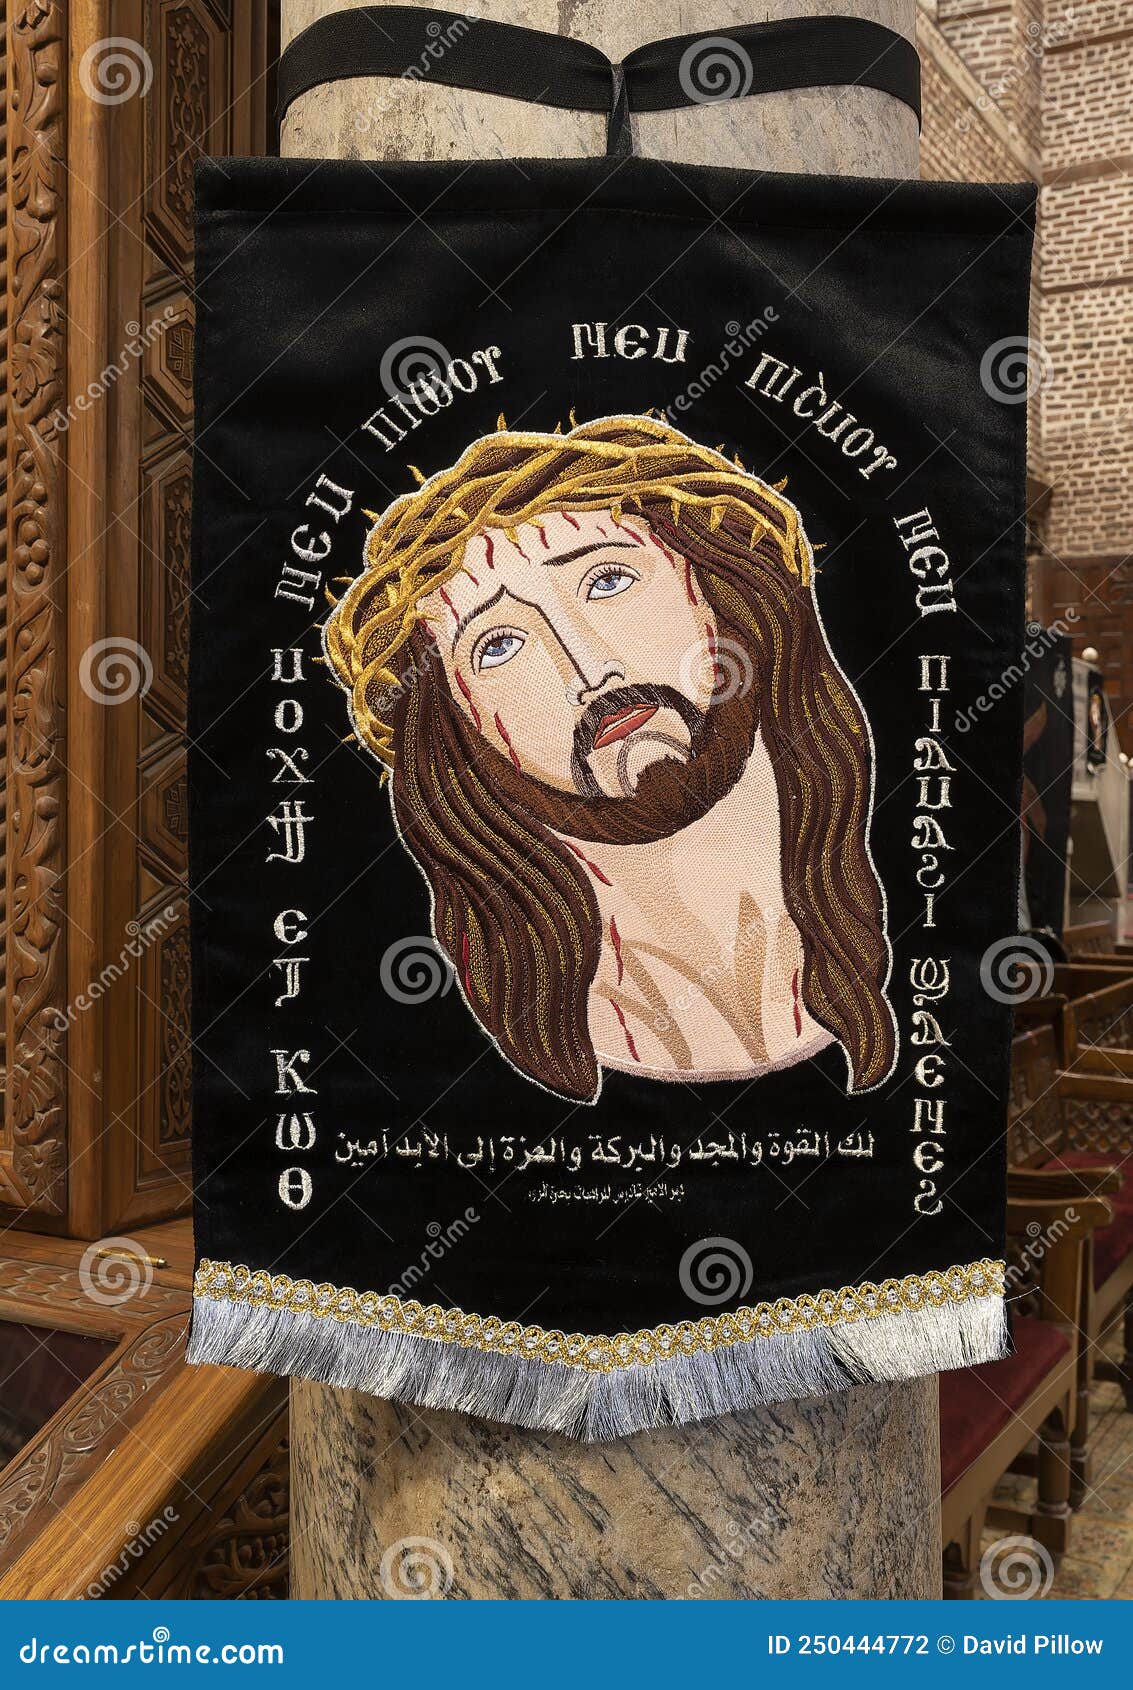 Jesus in Thorns Tapestry Wall Hanging Woven In Italy 